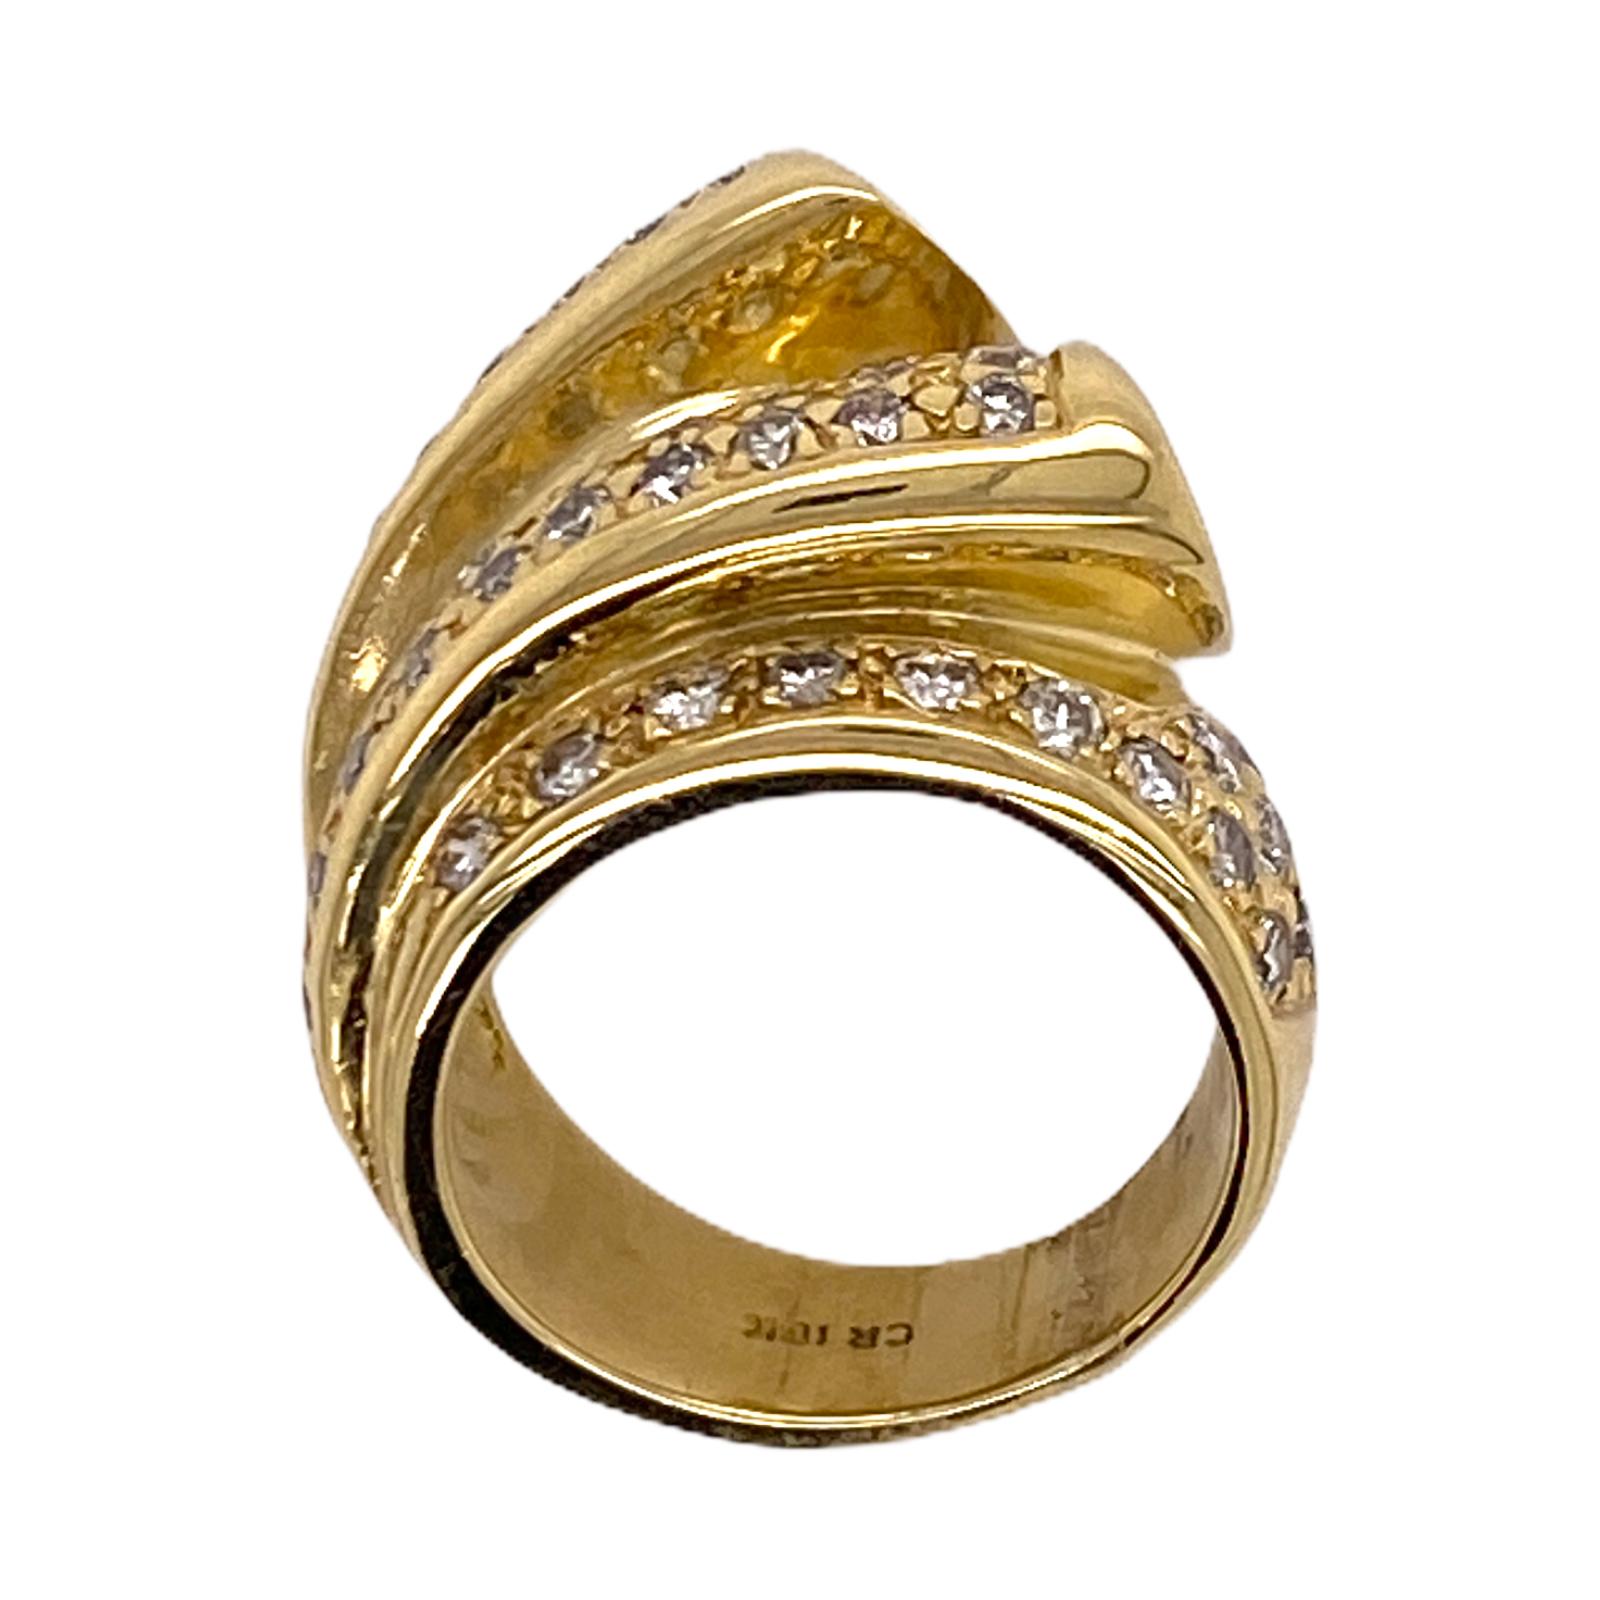 Fabulous pave diamond ribbon ring fashioned in 18 karat yellow gold. The ring features round brilliant cut diamonds weighing 1.20 carat total weight and graded H-I color and SI clarity. The ring measures .75 inches in width and is currently size 5